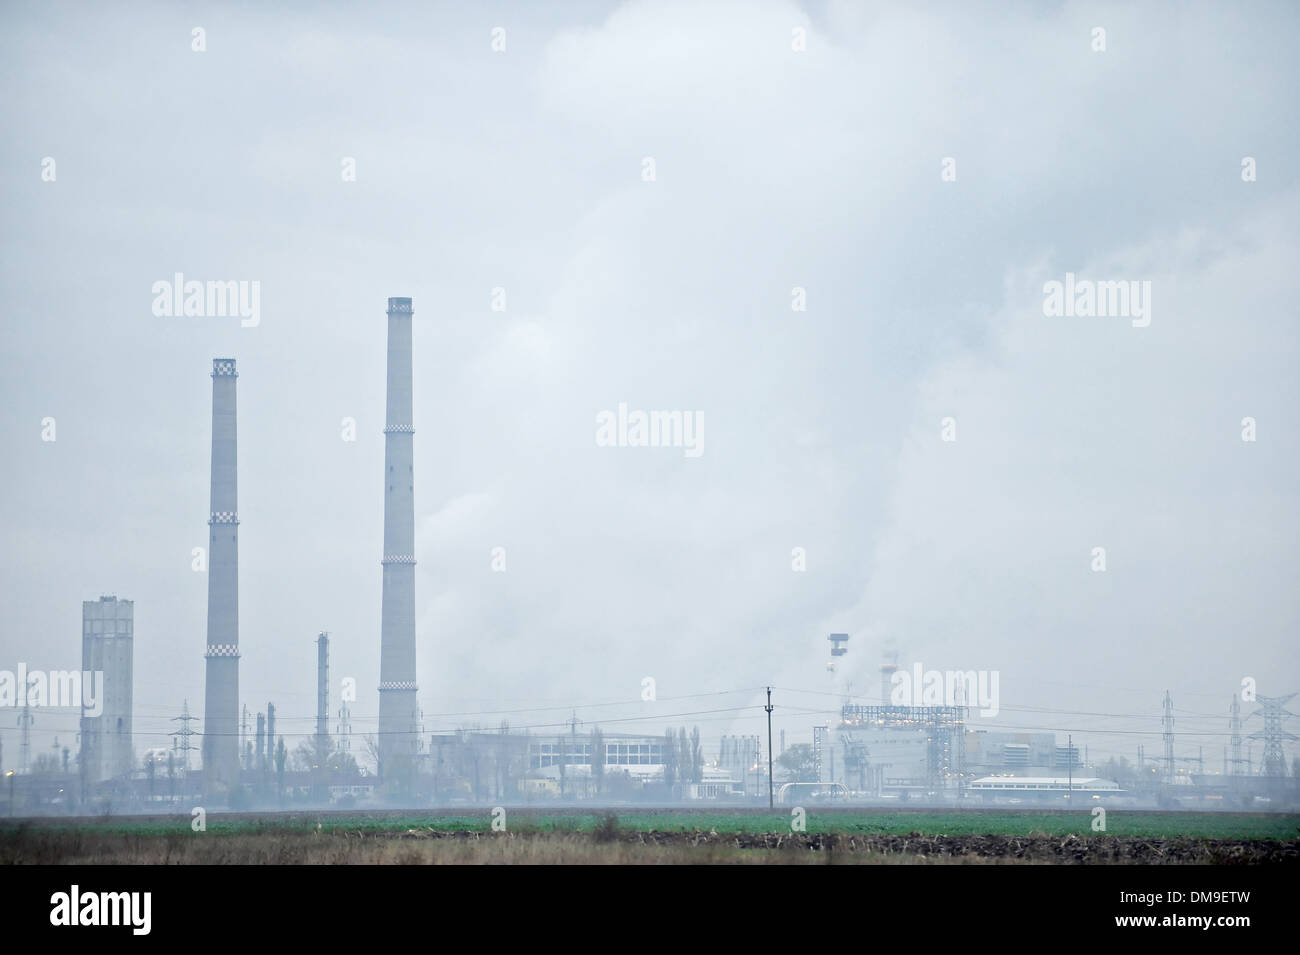 Industrial landscape with petrochemical plant early in the morning Stock Photo